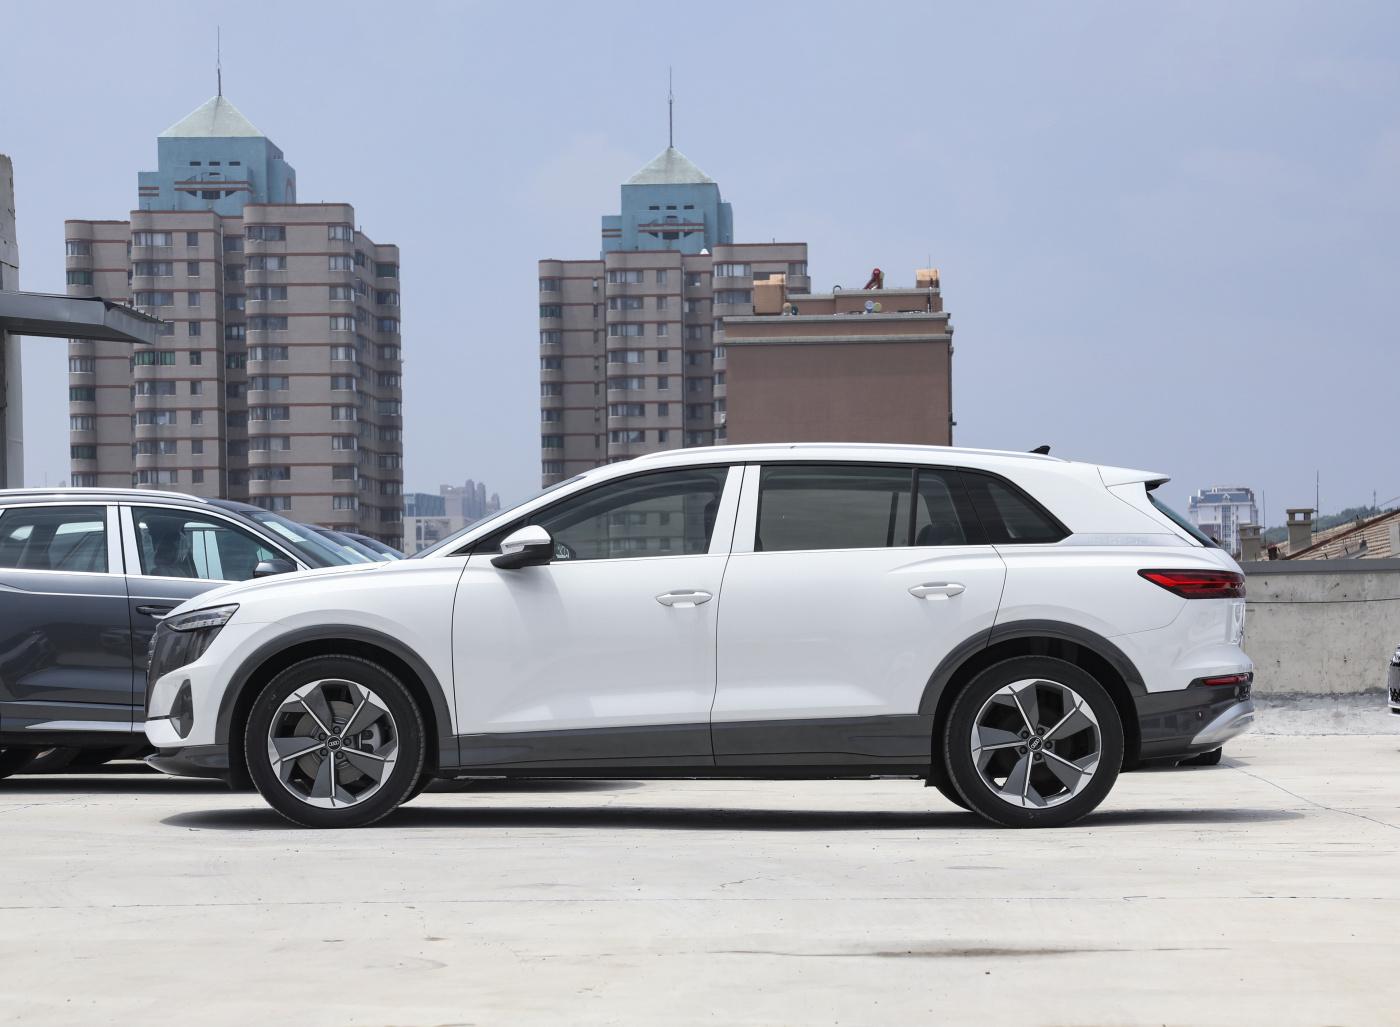 2024 Audi Q5 E-Tron Large Electric SUV Support Export Trade in China - Audi - 3